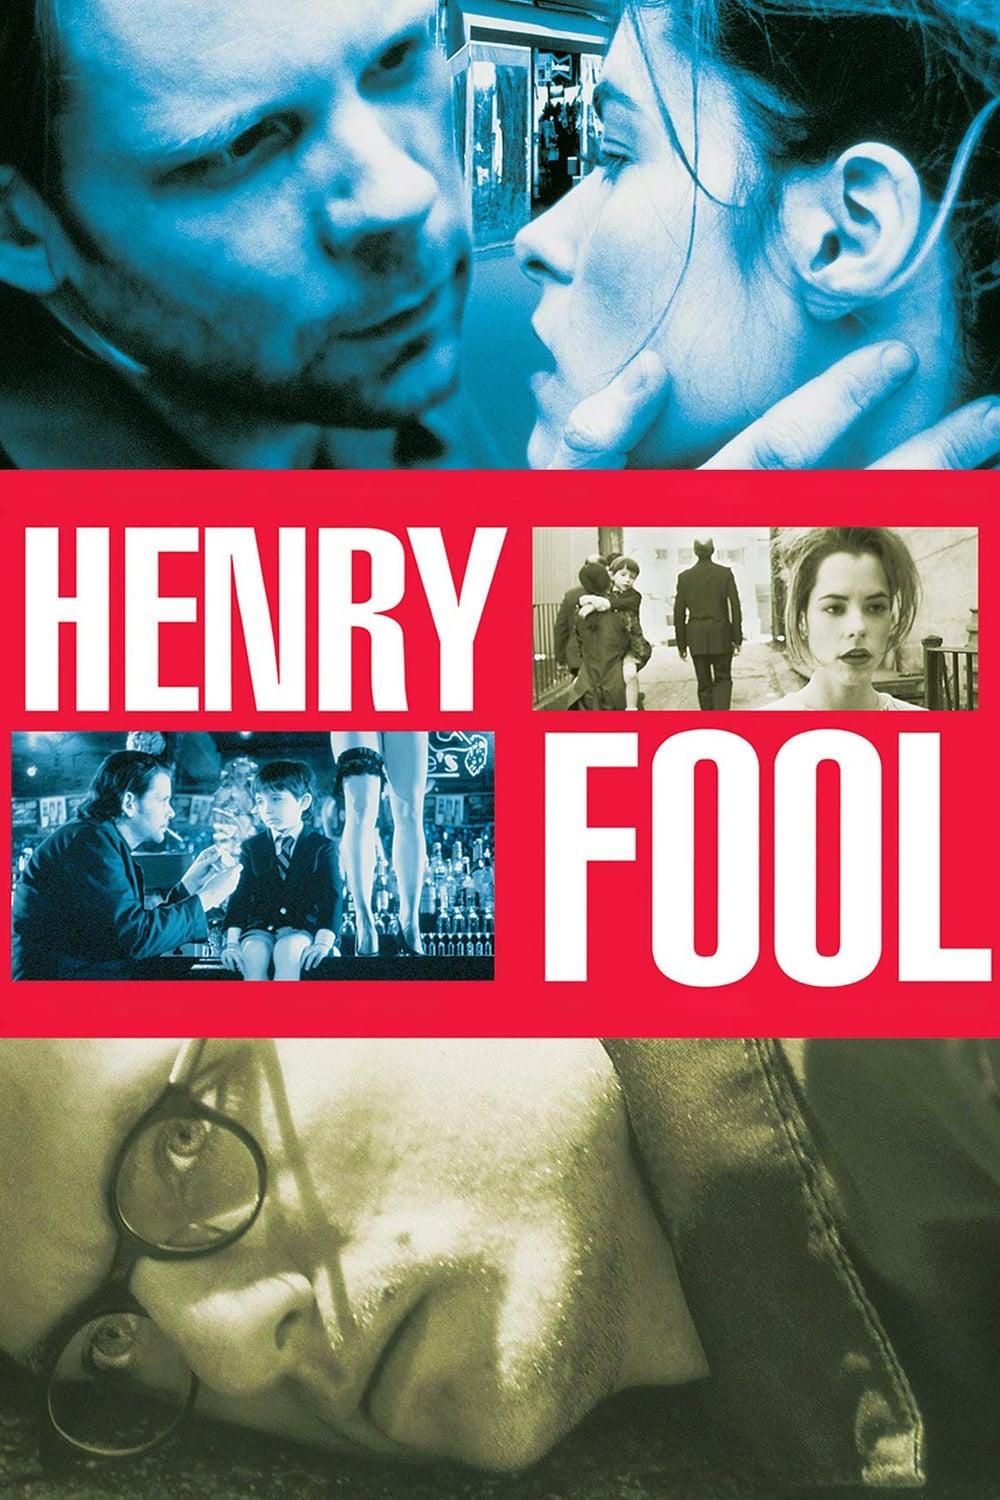 Henry Fool poster